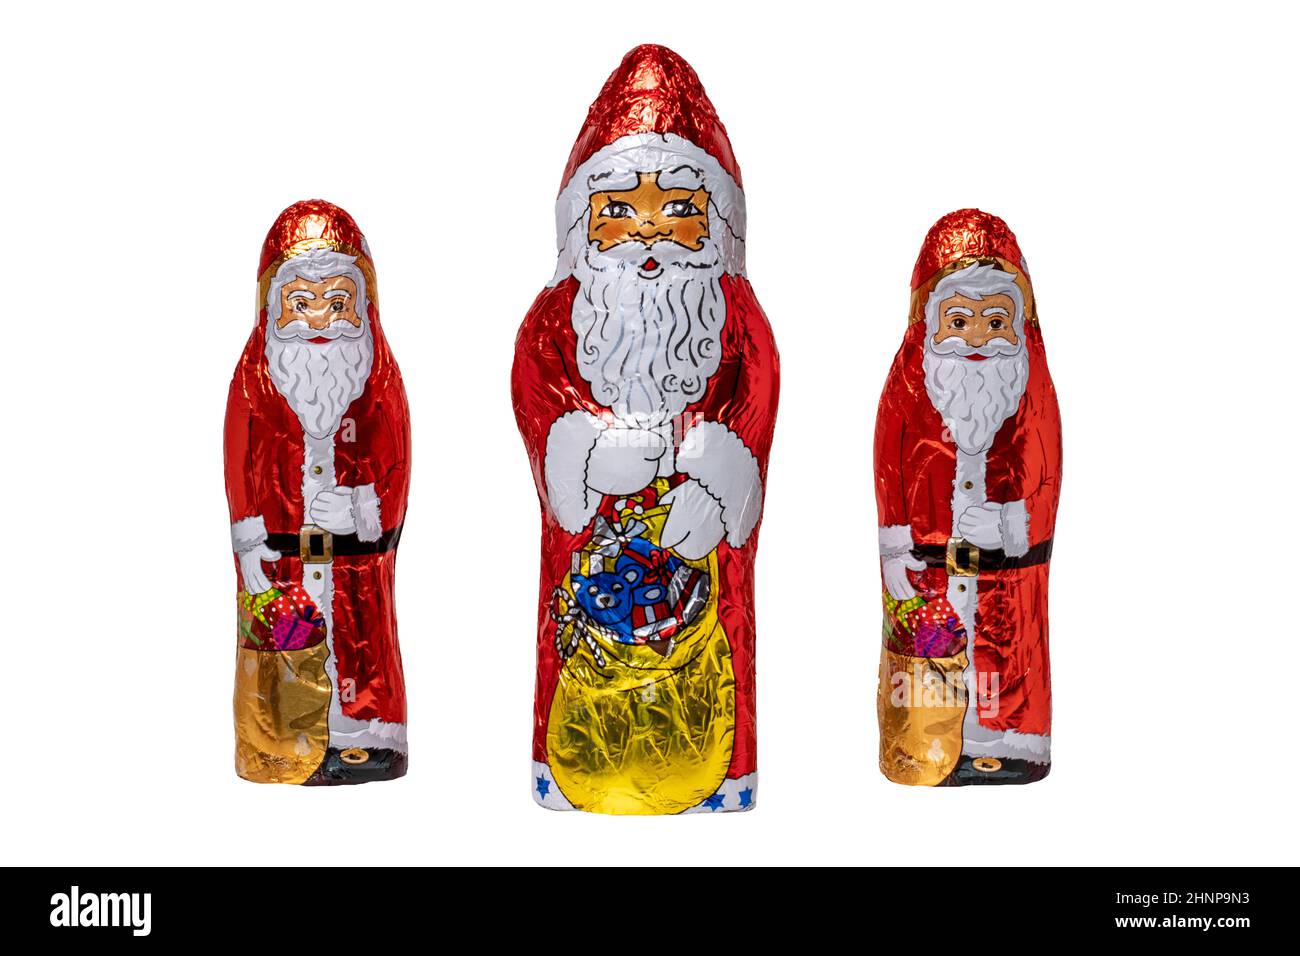 Santa, Nikolaus Or Christkindl: Christmas Traditions In Germany Article The  United States Army